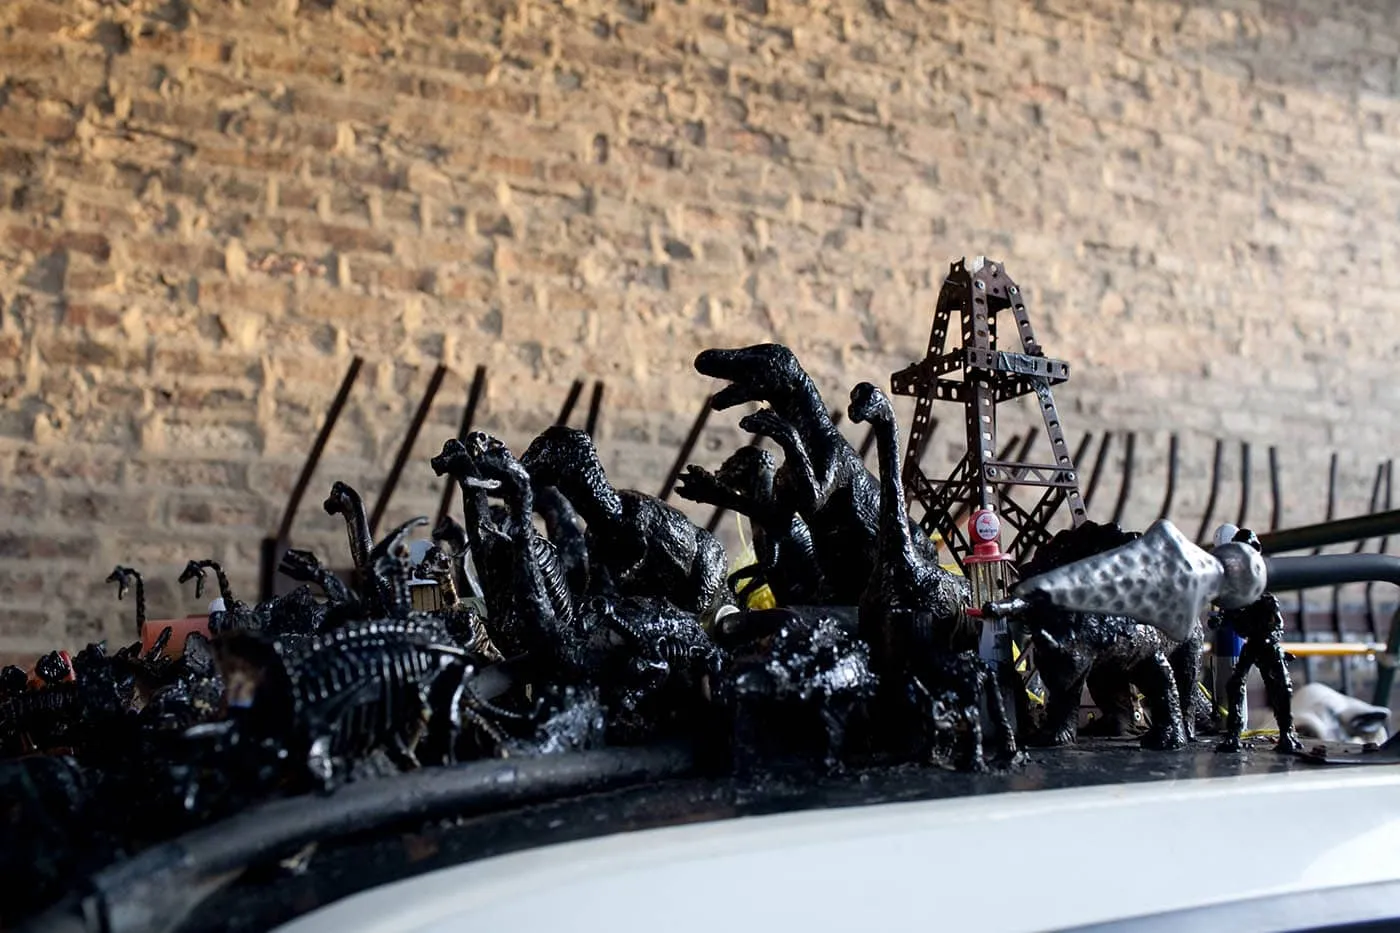 Erika Nelson's Art Car - The World's Largest Collection of the World's Smallest Versions of the World's Largest Things